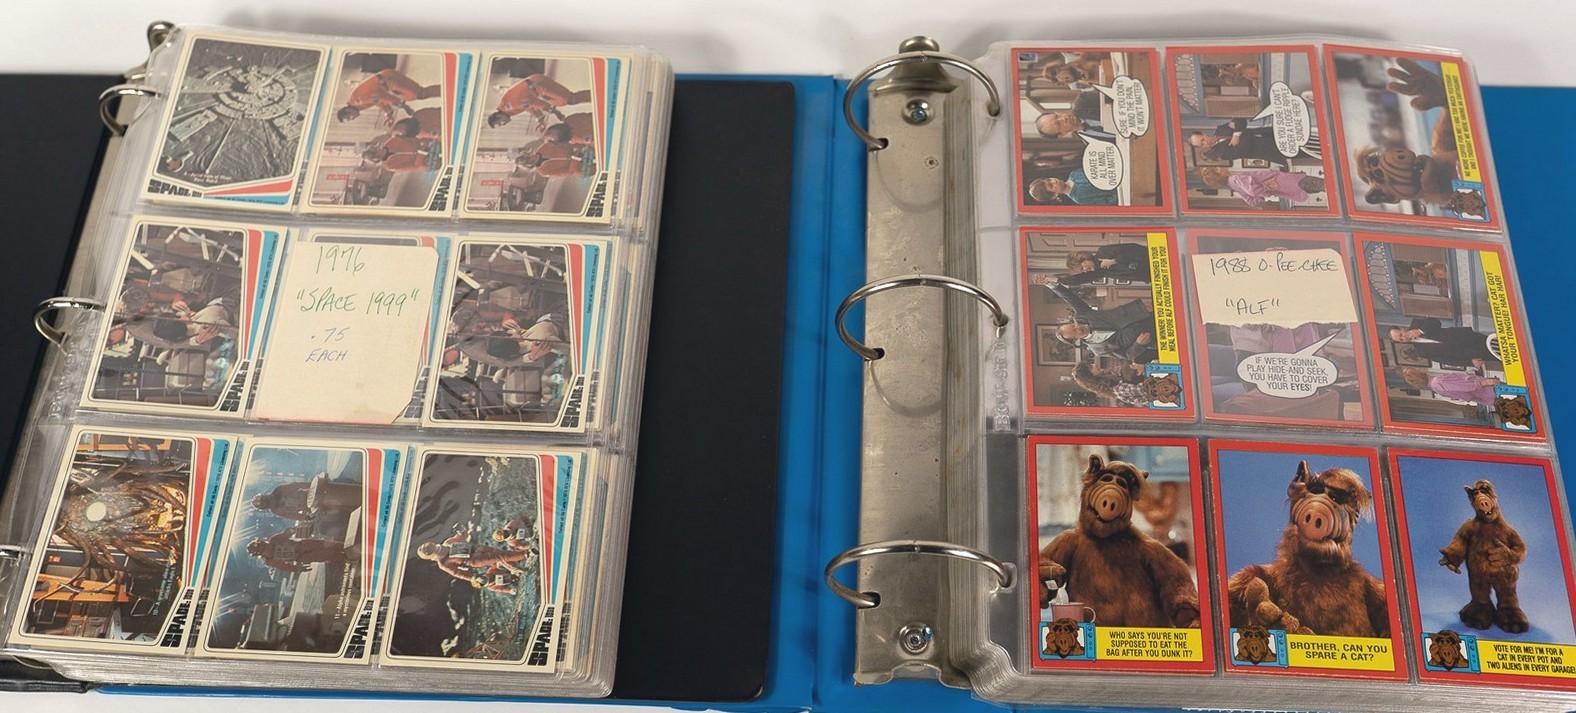 2 BINDERS OF "TV SHOW/MOVIE" CARDS AND STICKERS